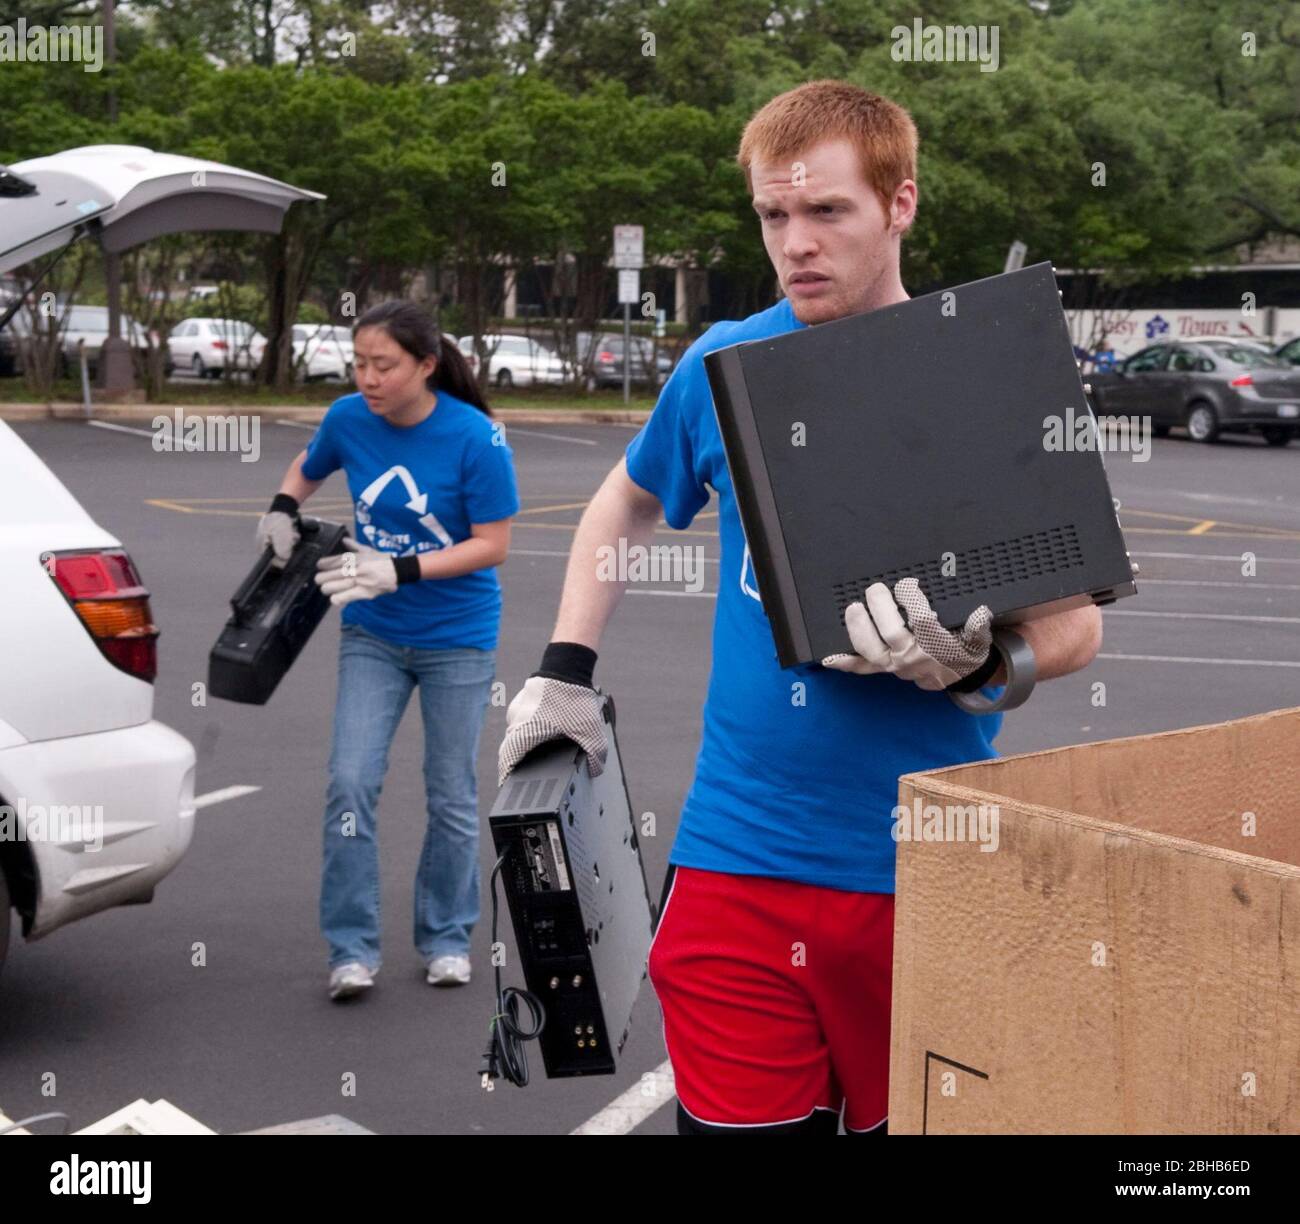 Austin Texas USA, April 17 2010: Engineering students from the University of Texas coordinate an 'E-Waste Drive' to recycle old computers and electronics from households and offices to keep  hazardous materials out of local landfills. About 50 stacks of computers, monitors, printers and televisions were hauled away for proper disposal in the day-long effort. ©Bob Daemmrich Stock Photo